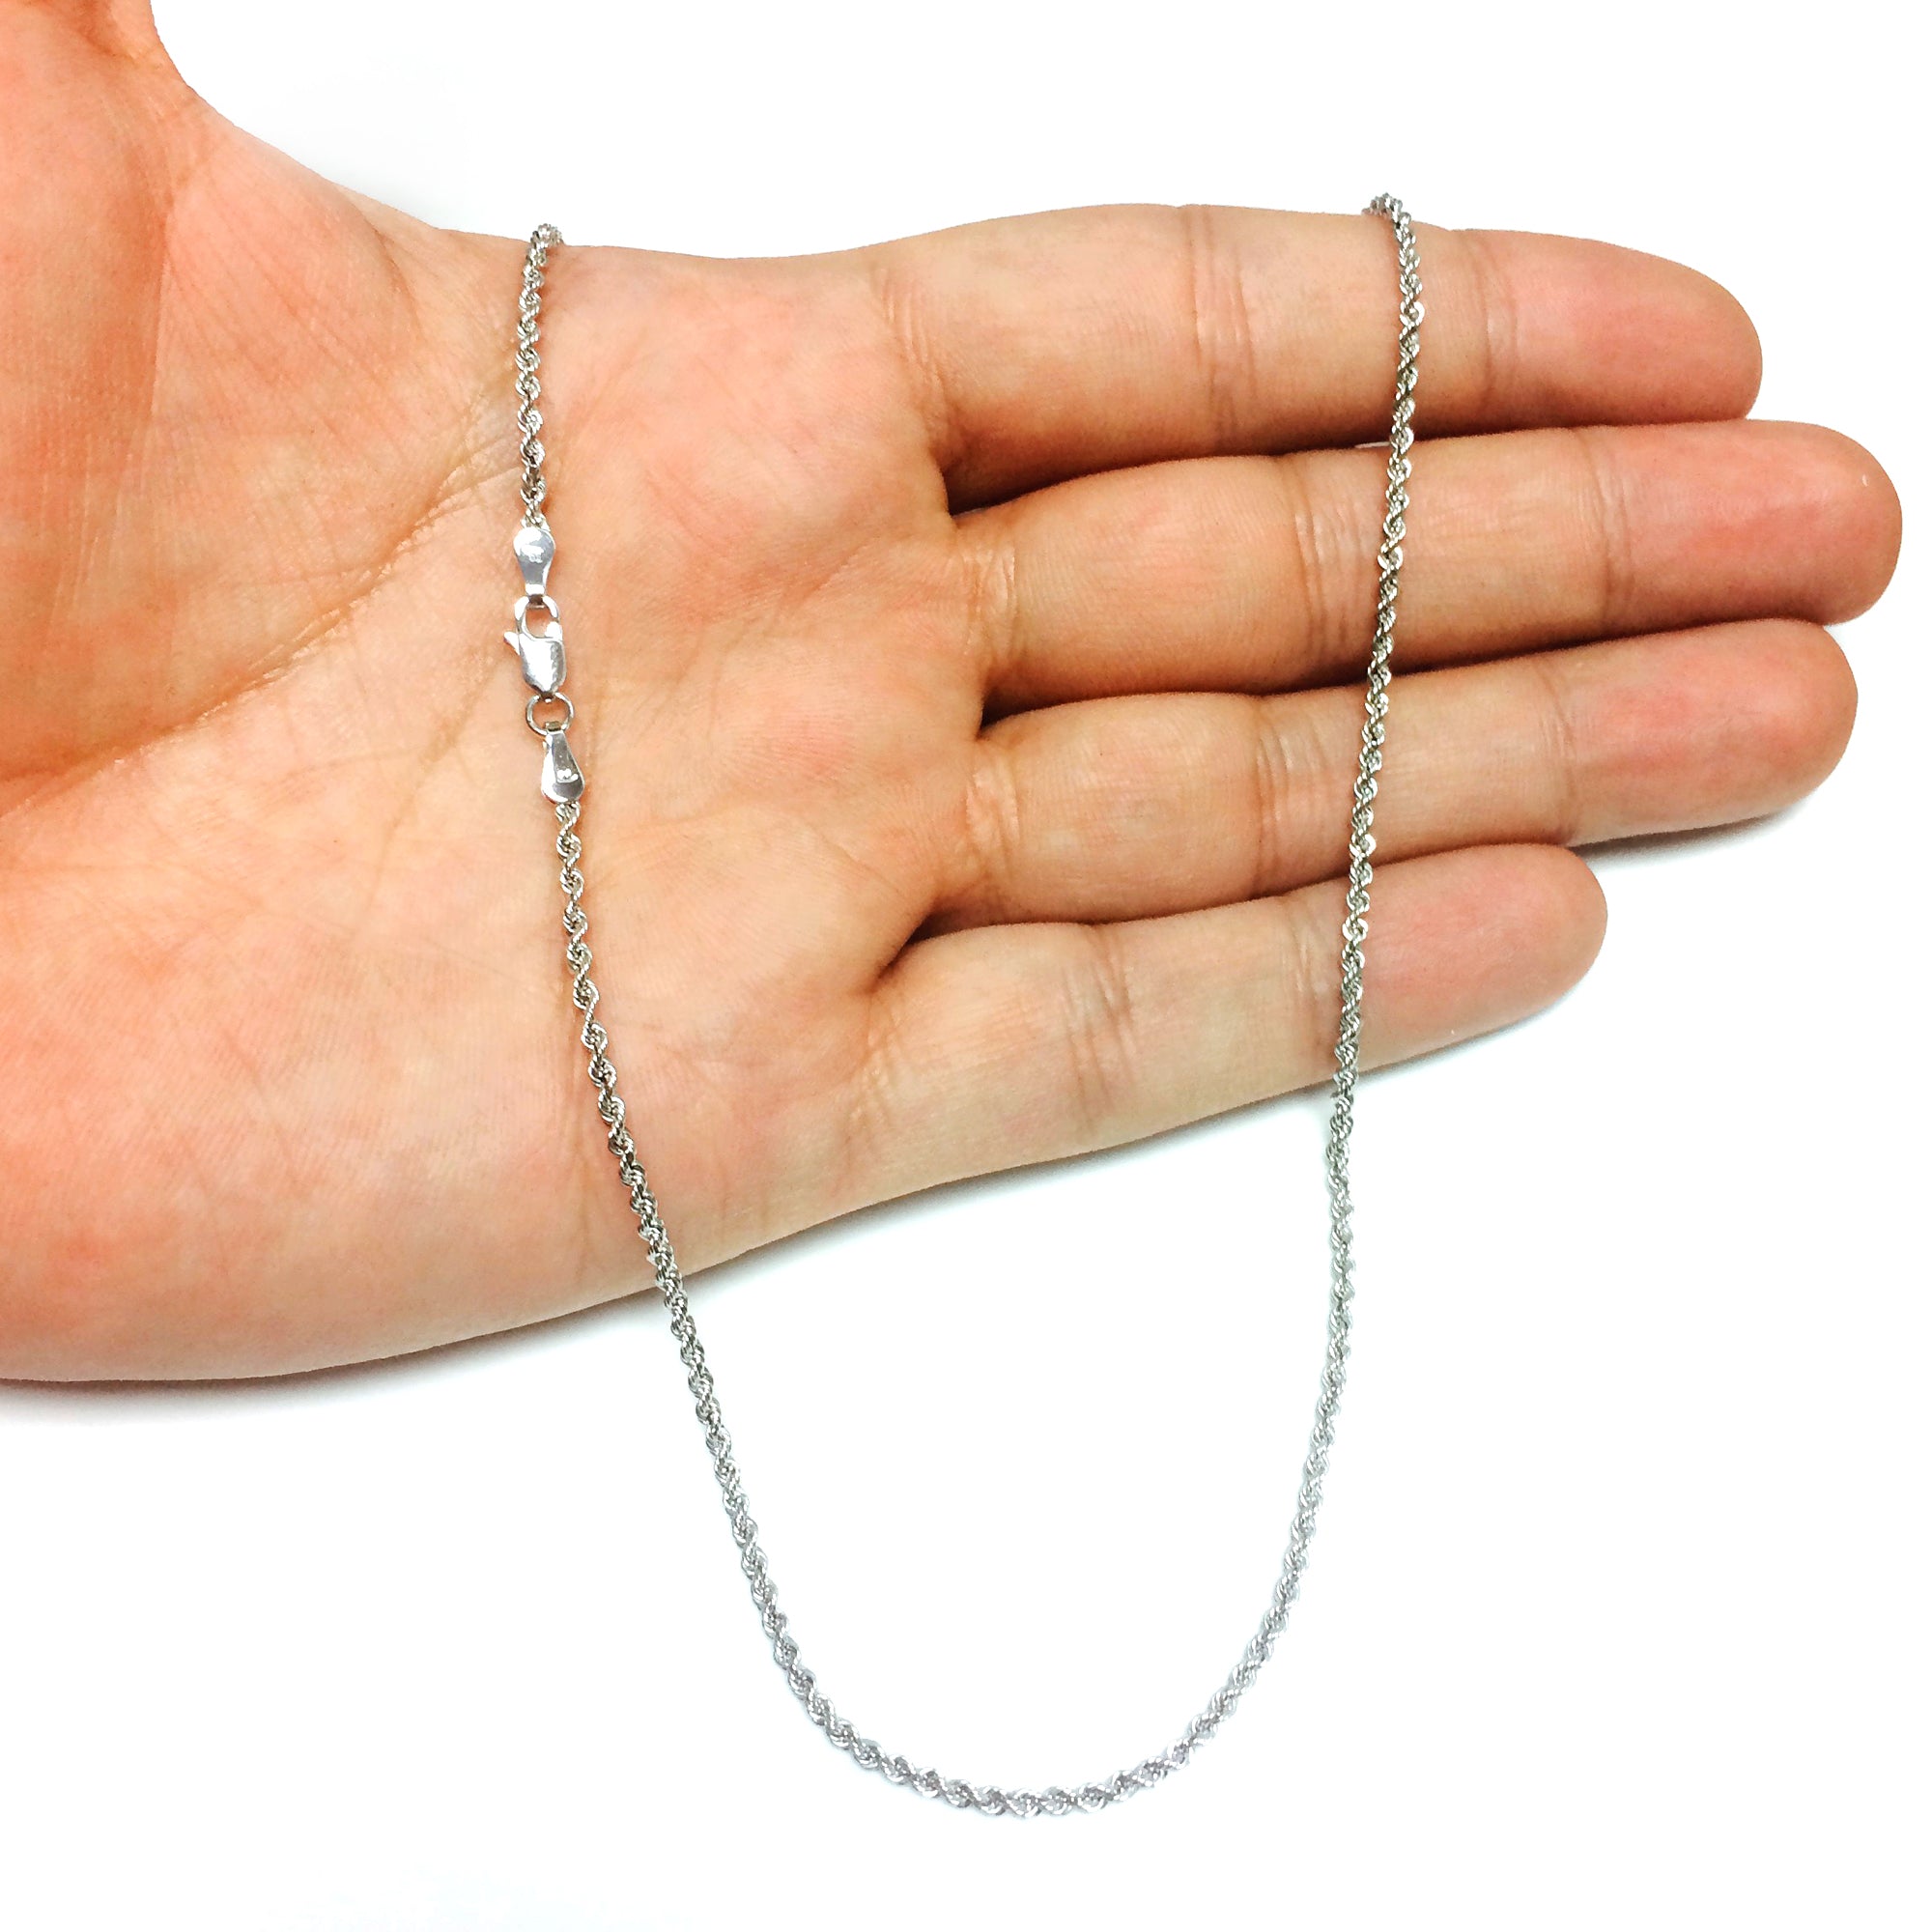 10K White Gold Hollow Rope Chain Necklace, 2mm, 24" fine designer jewelry for men and women